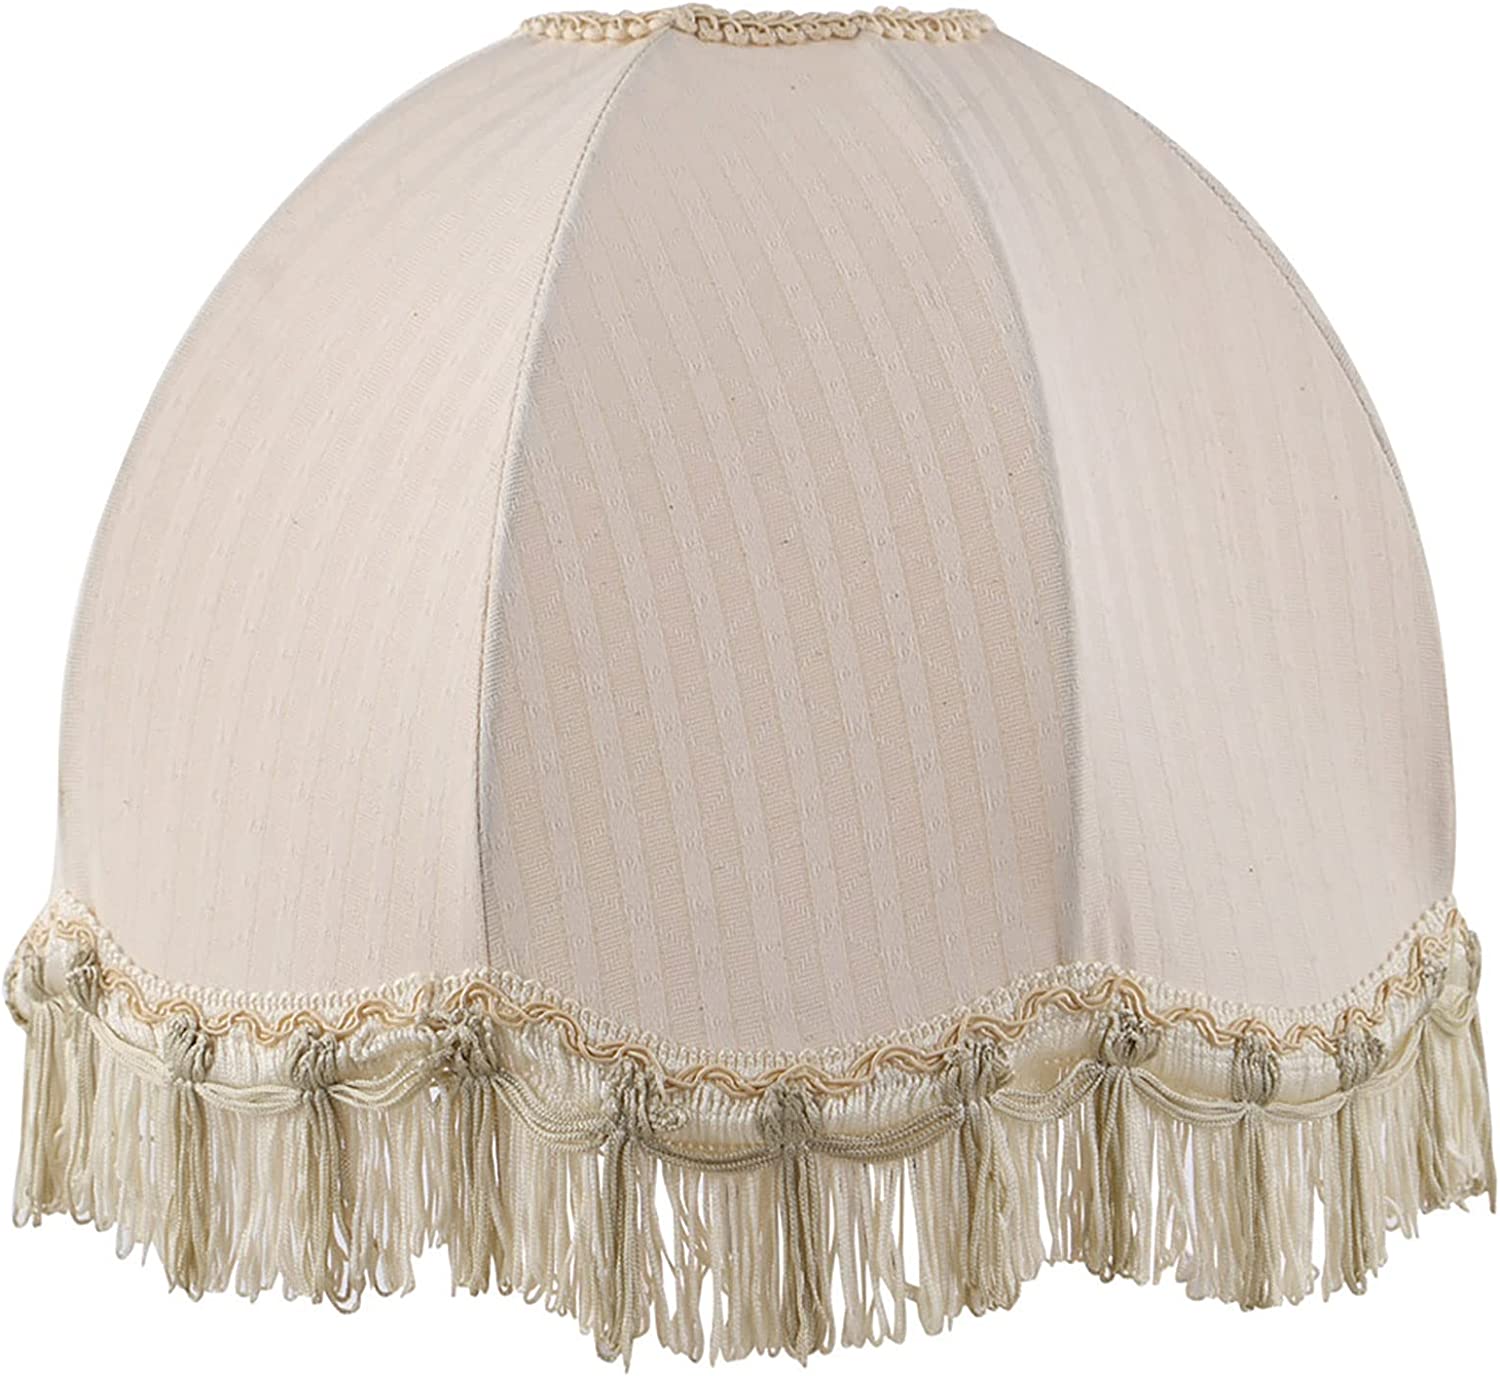 34501, Handsewn Off-White Spider Lamp Shade/Jacquard Textured